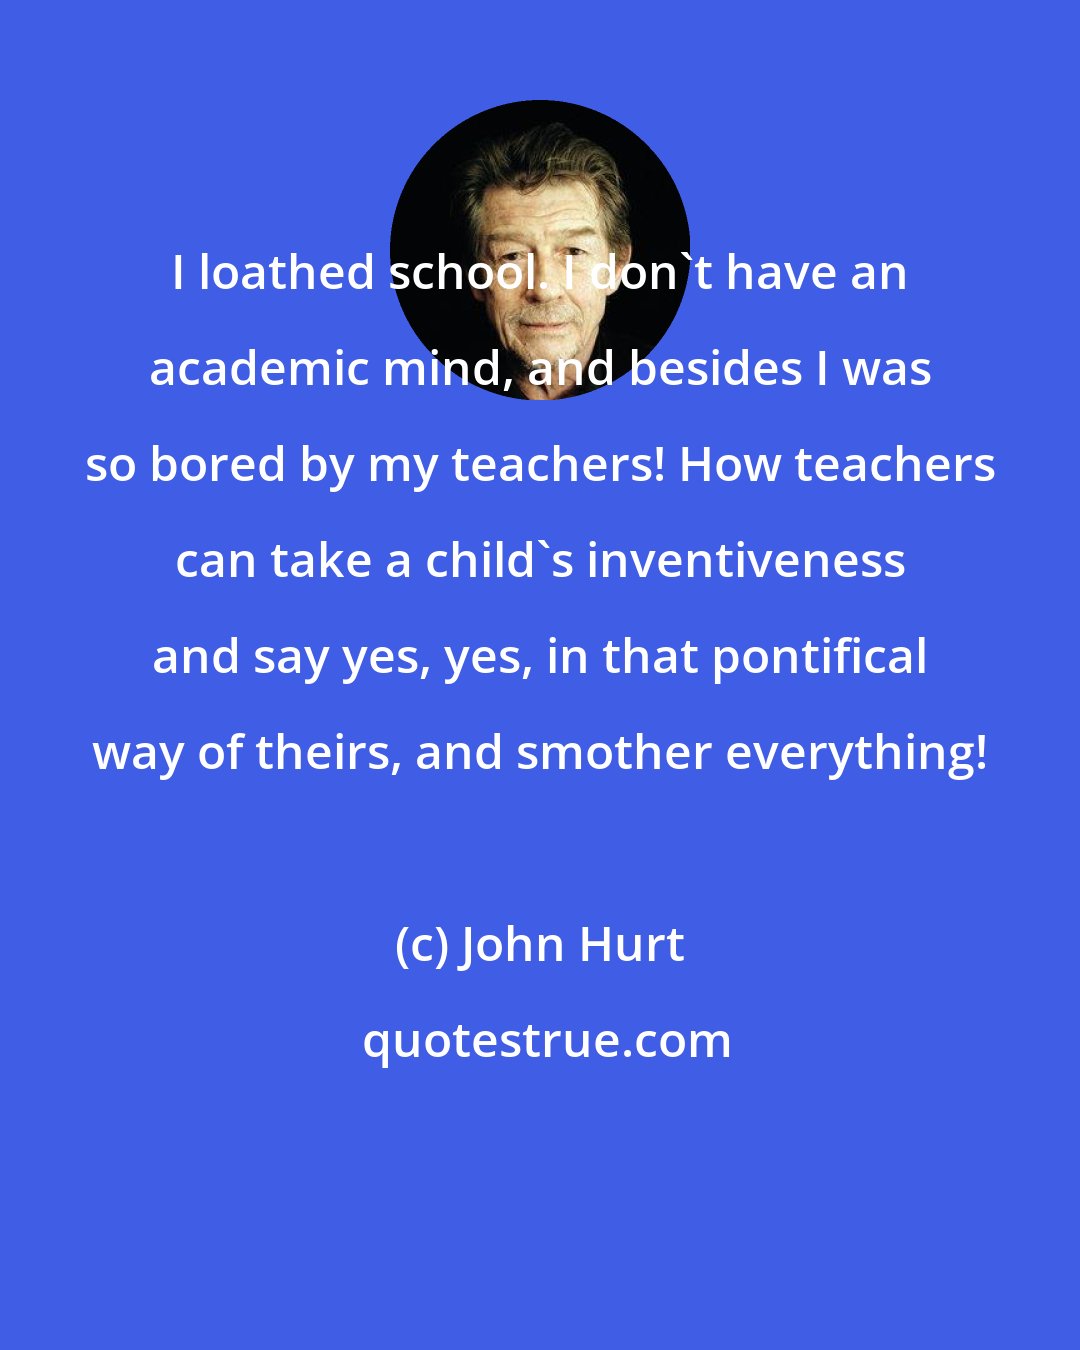 John Hurt: I loathed school. I don't have an academic mind, and besides I was so bored by my teachers! How teachers can take a child's inventiveness and say yes, yes, in that pontifical way of theirs, and smother everything!